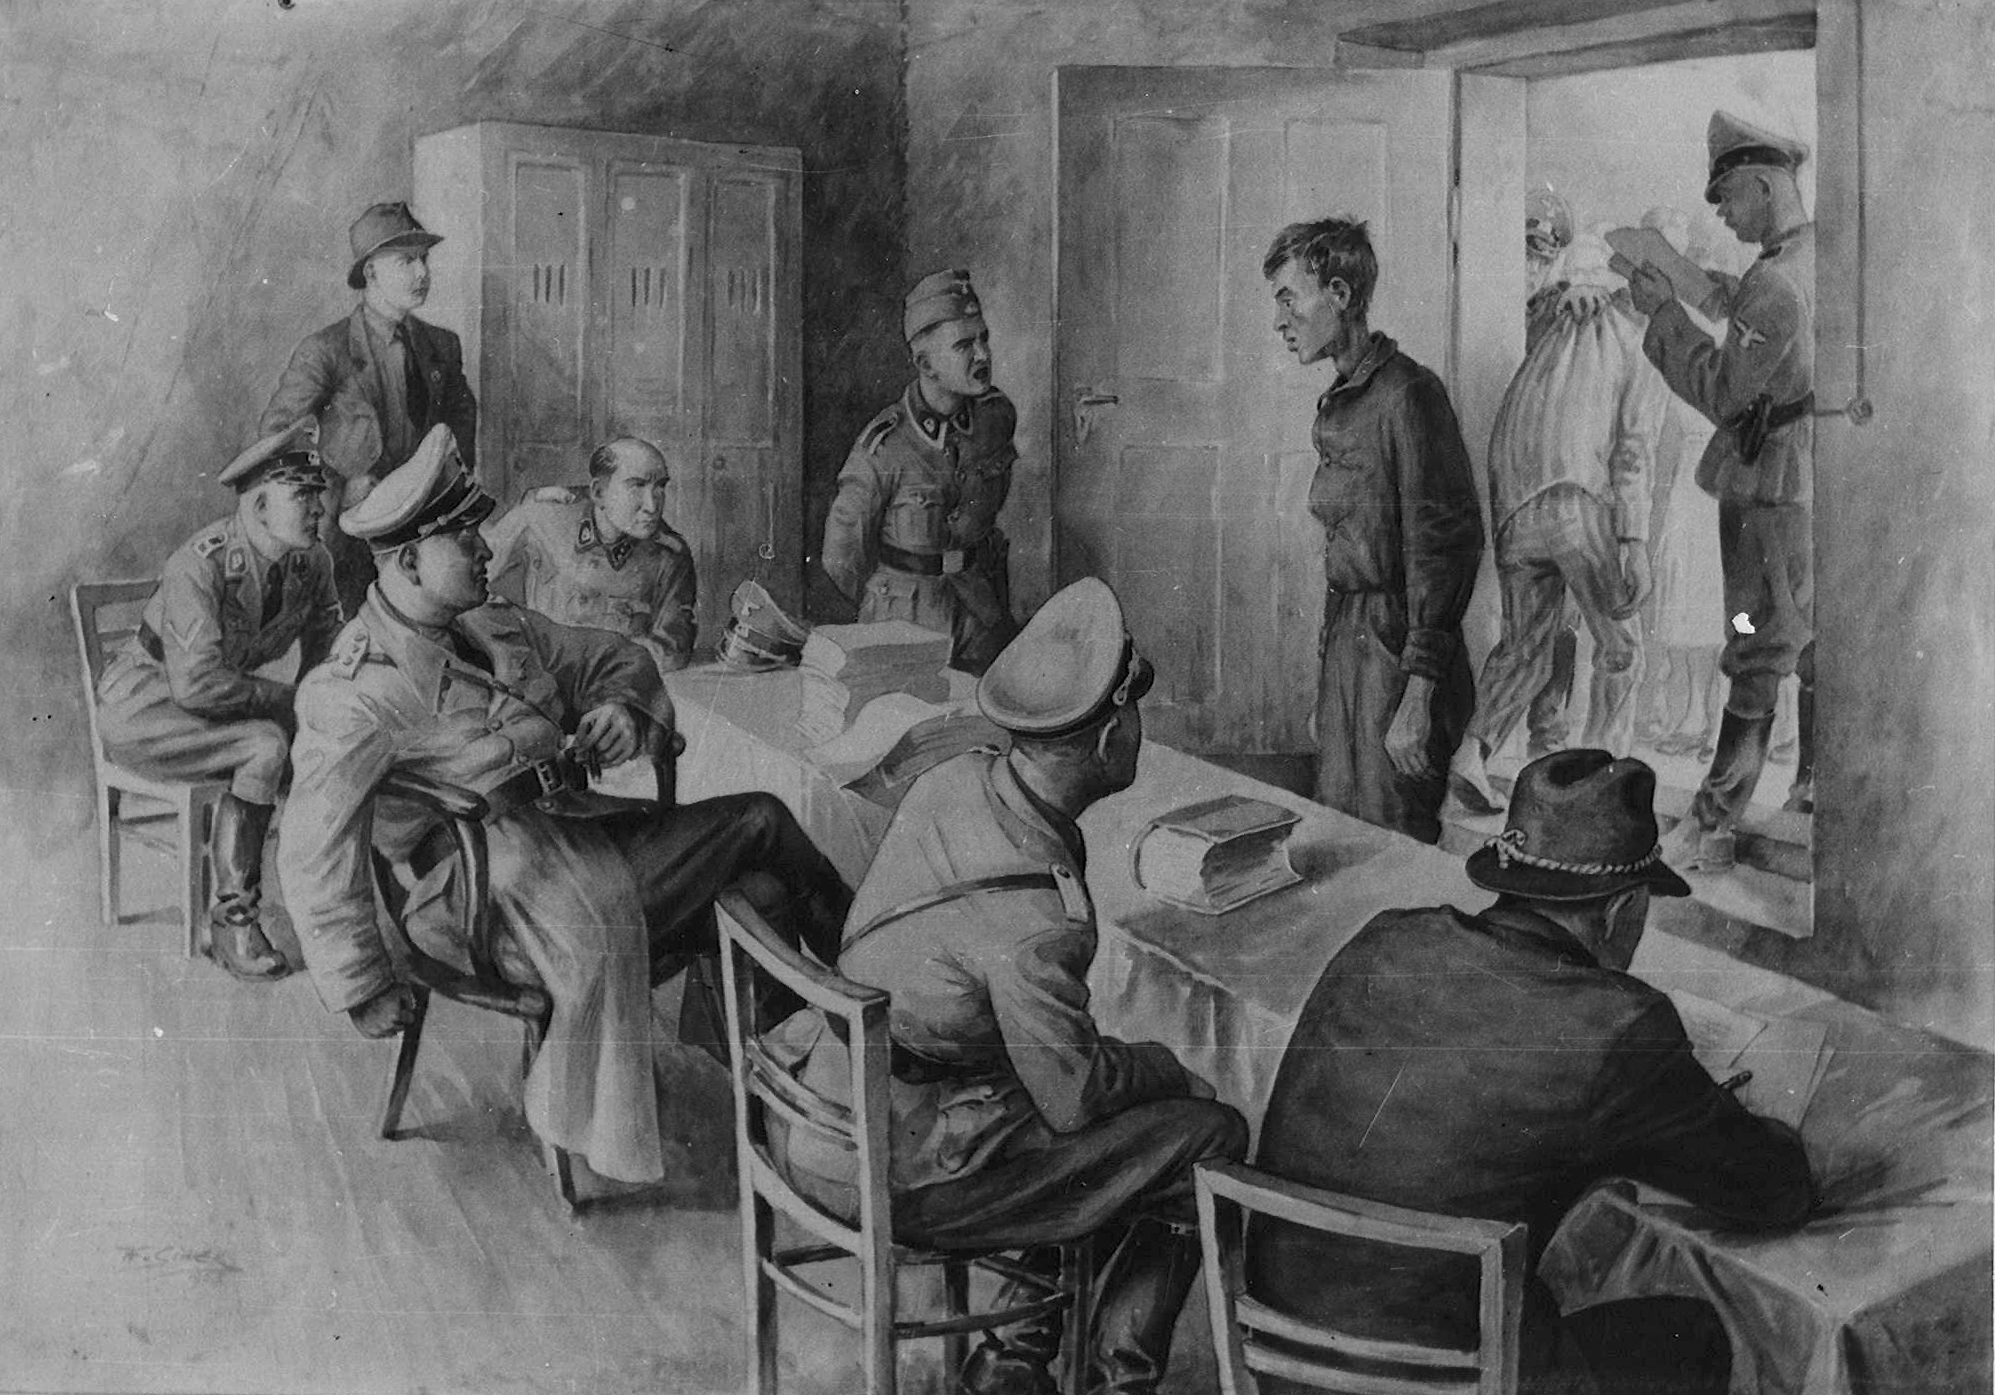 Drawing depicting a summary court scene. SS men are seated behind a long table, on the left an SS man is standing and saying something to a young boy facing the table. A prisoner who has just been judged is led out of the room by another SS man.